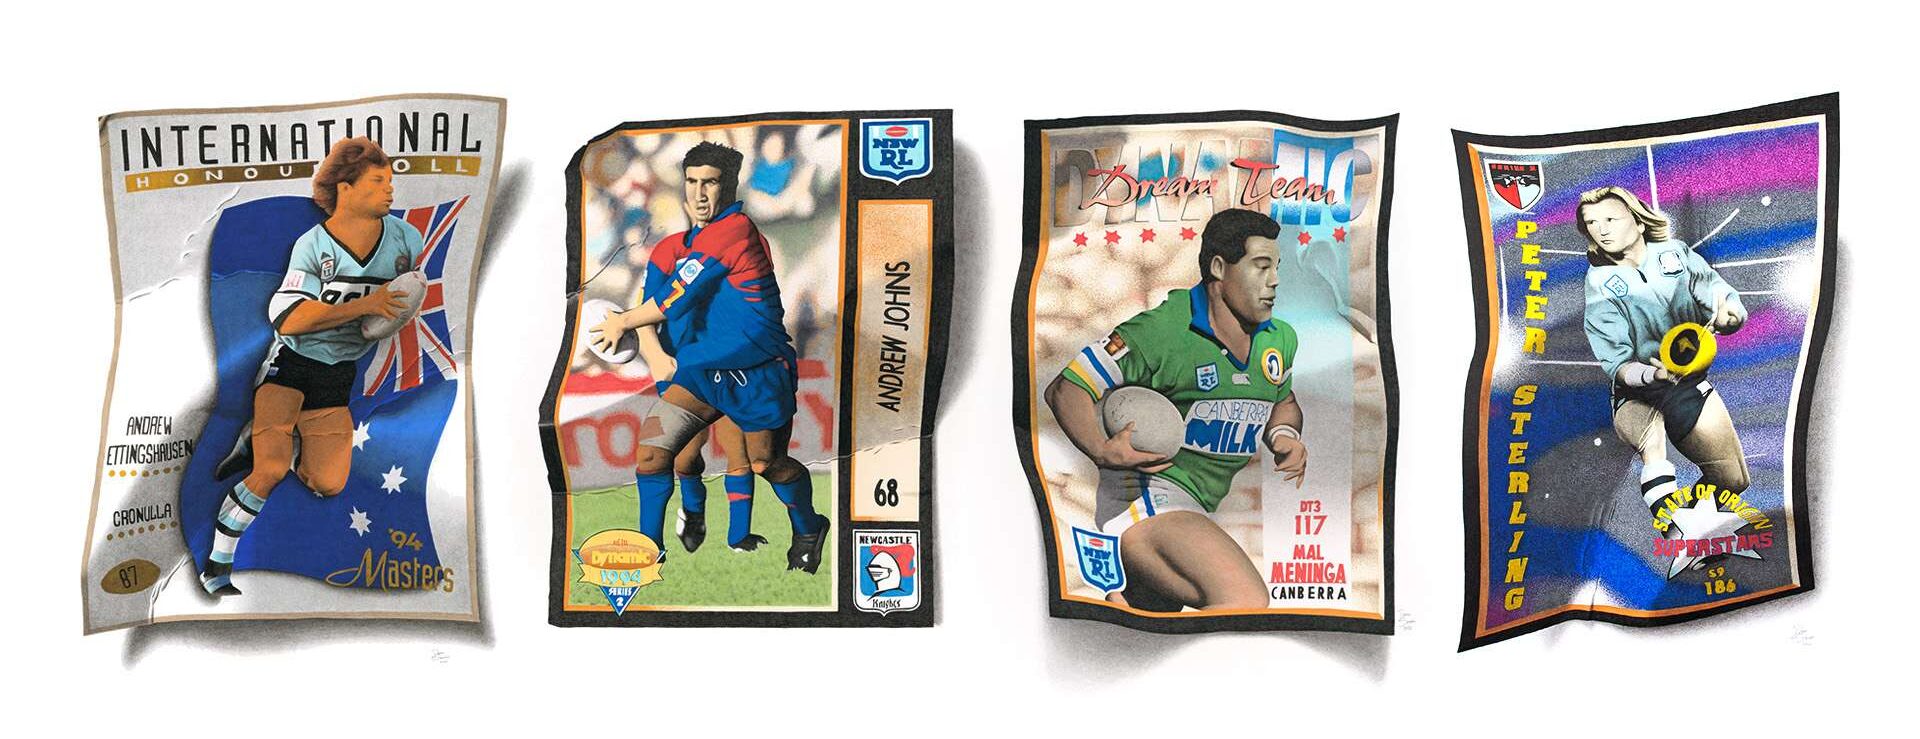 NRL Rugby League Crushed collector cards art series